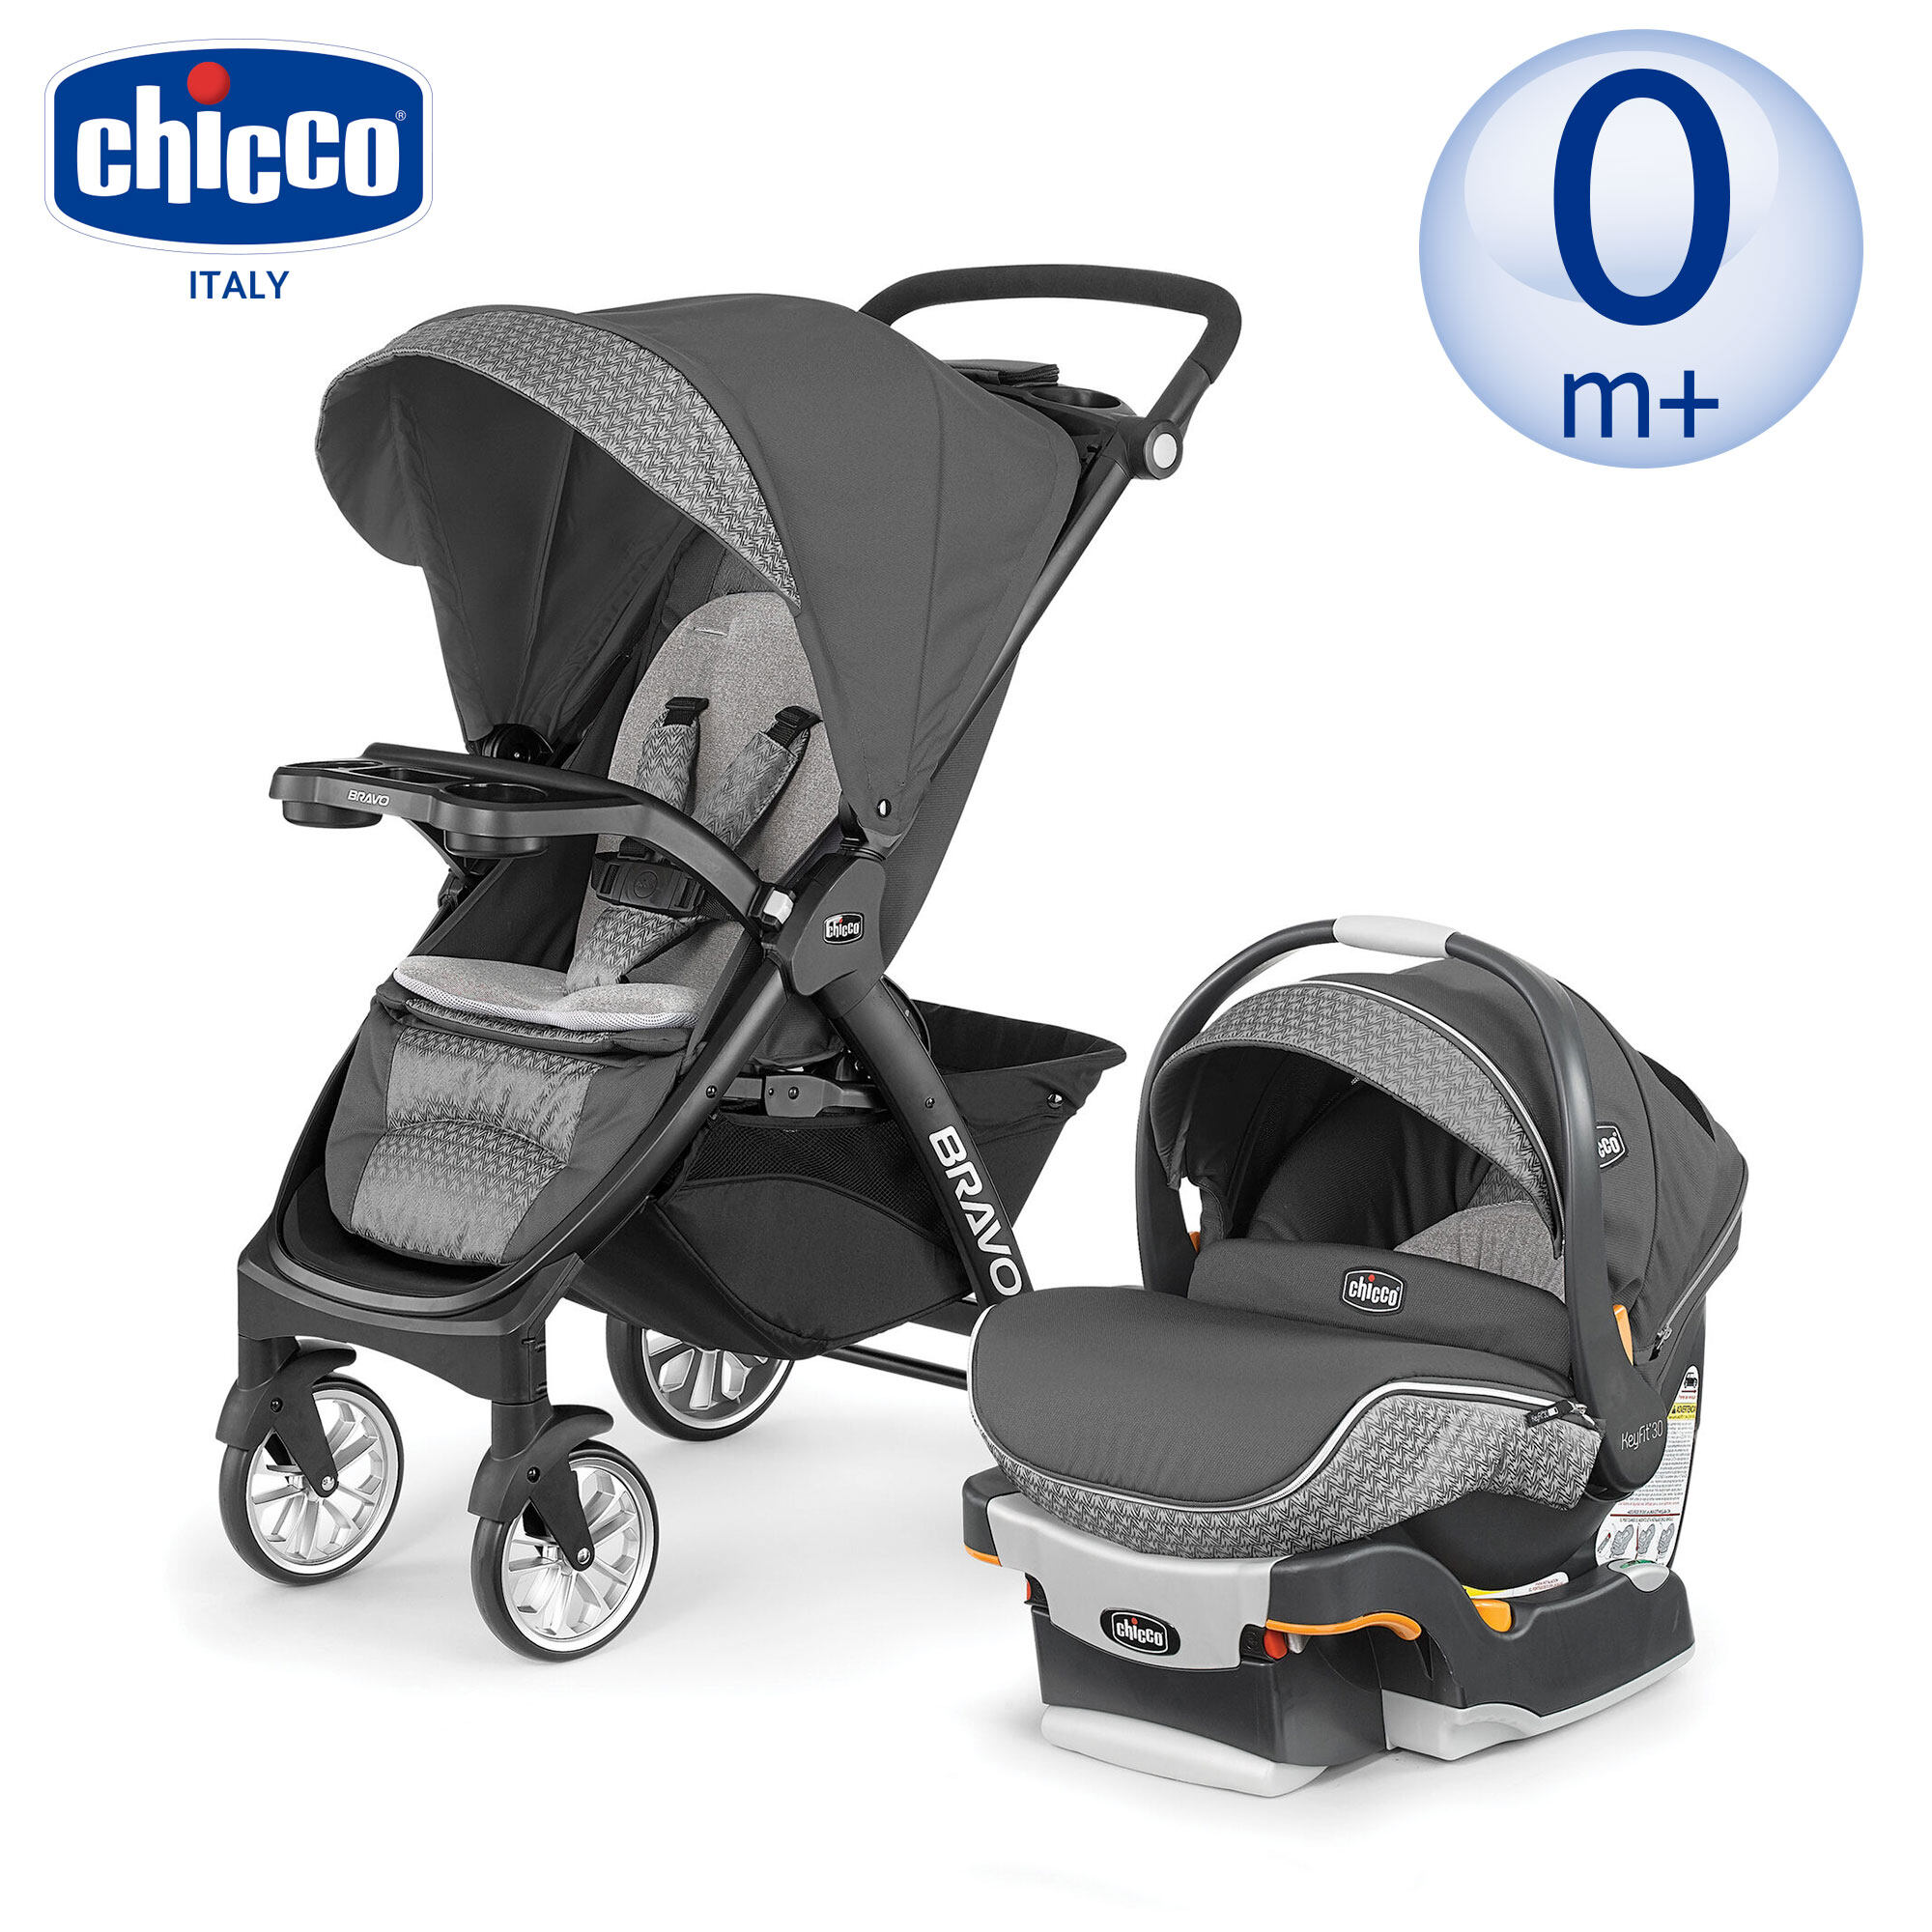 Chicco Bravo Le Travel System (stroller+car seat)